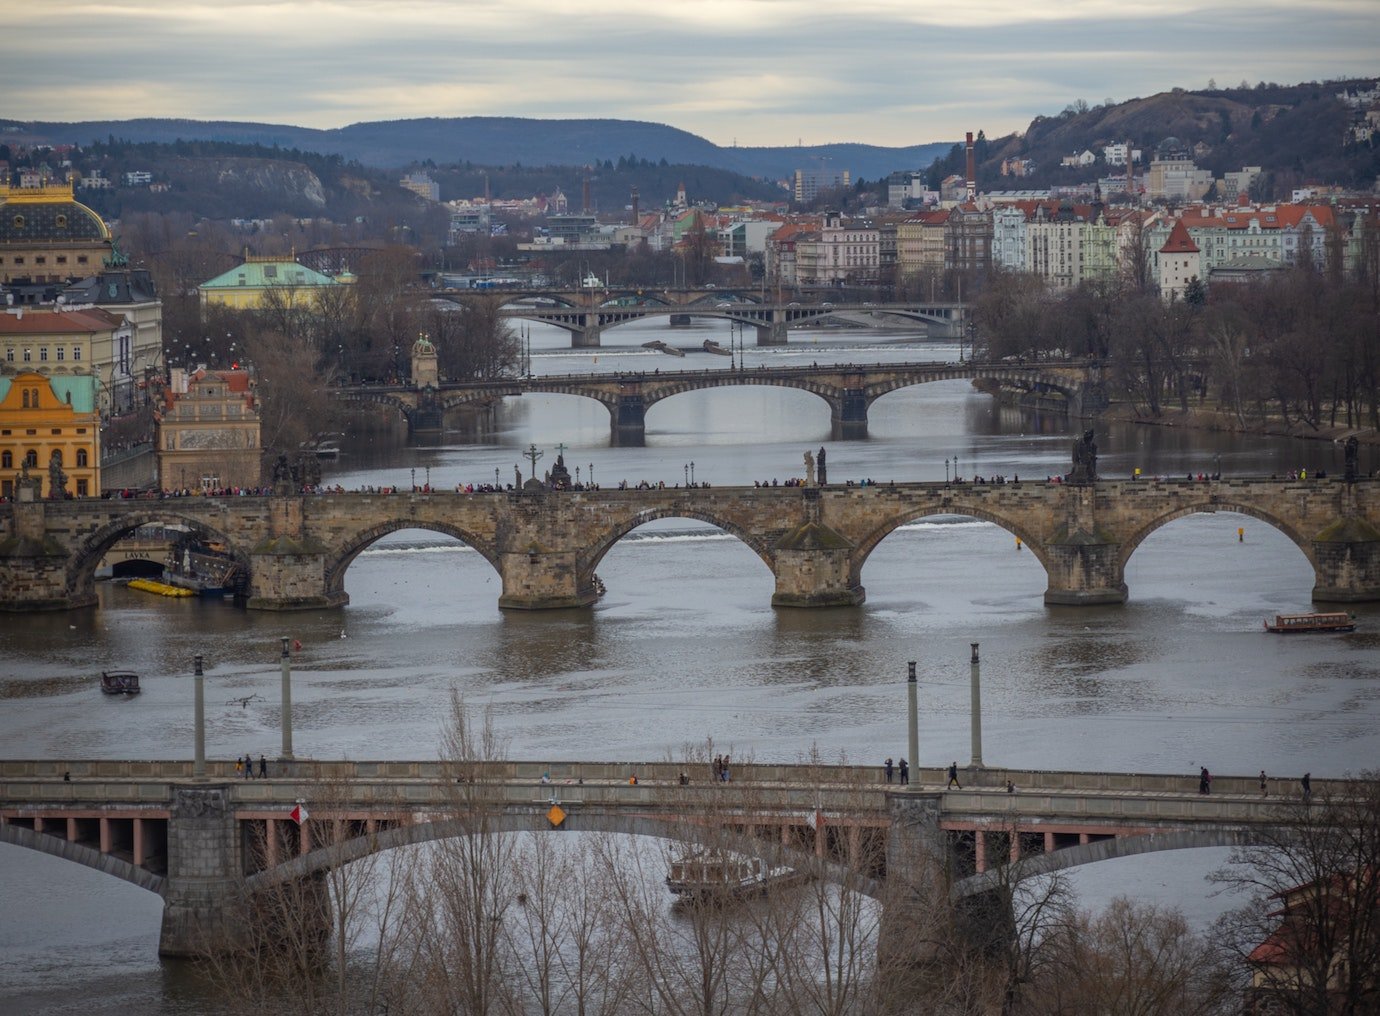 ‘How far away love is’: 3 poems from one family of Czech poets